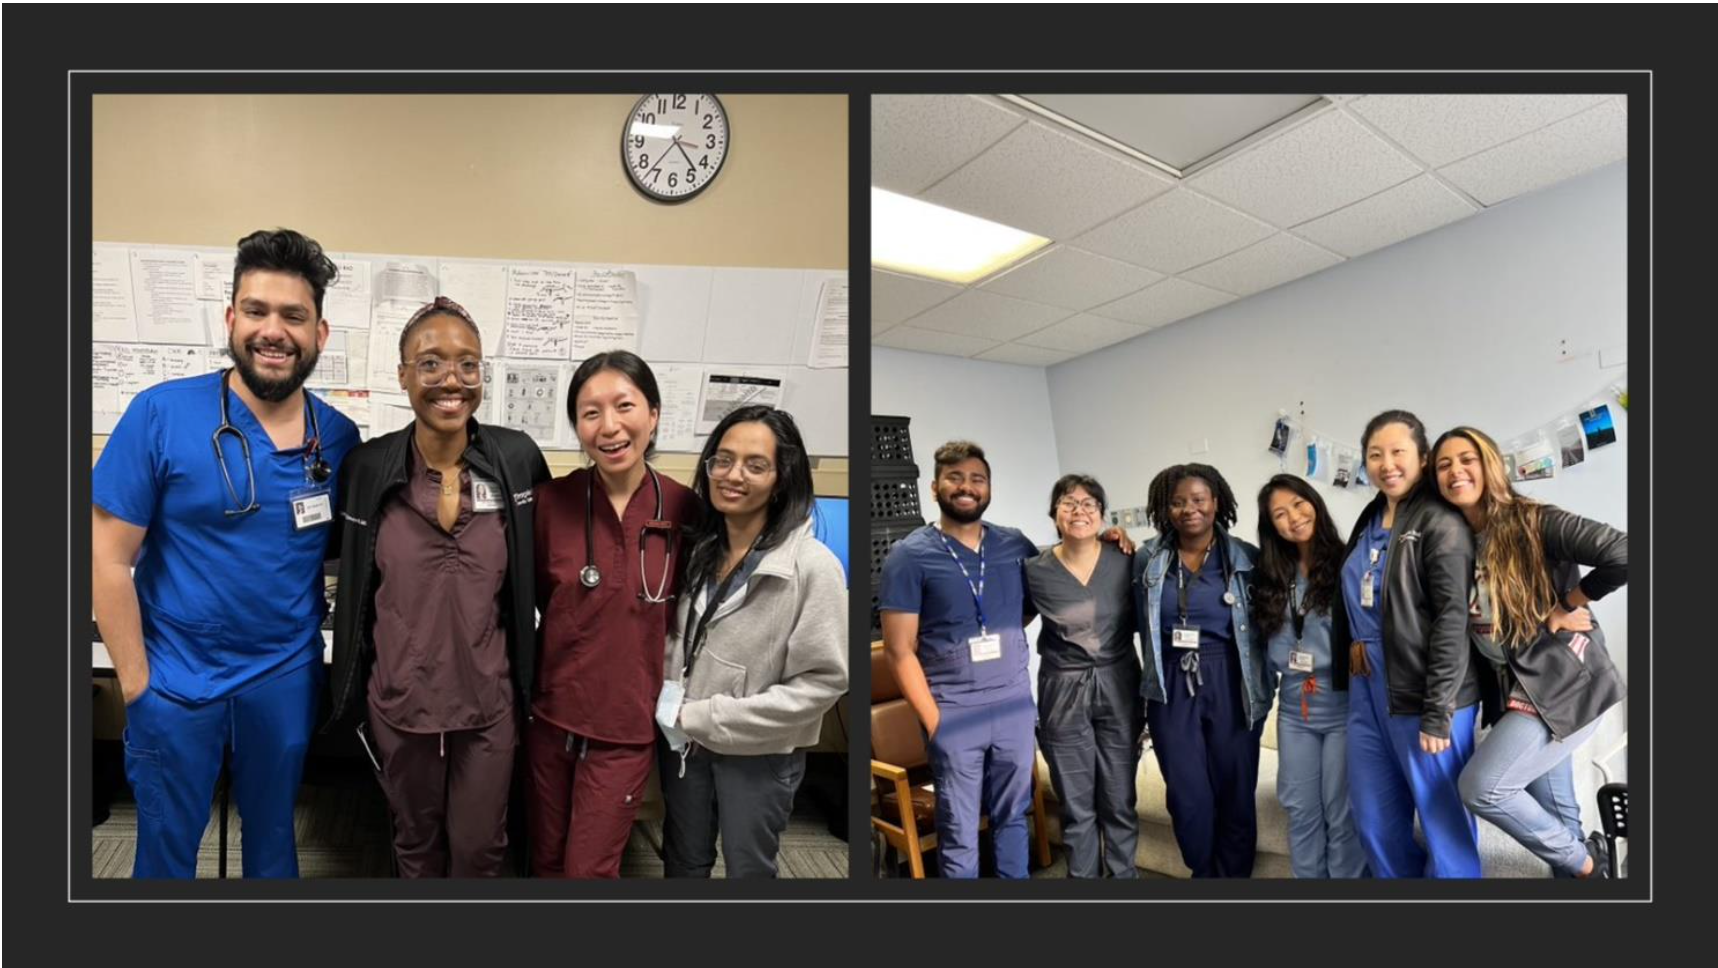 Temple's future physicians specializing in family medicine and community health